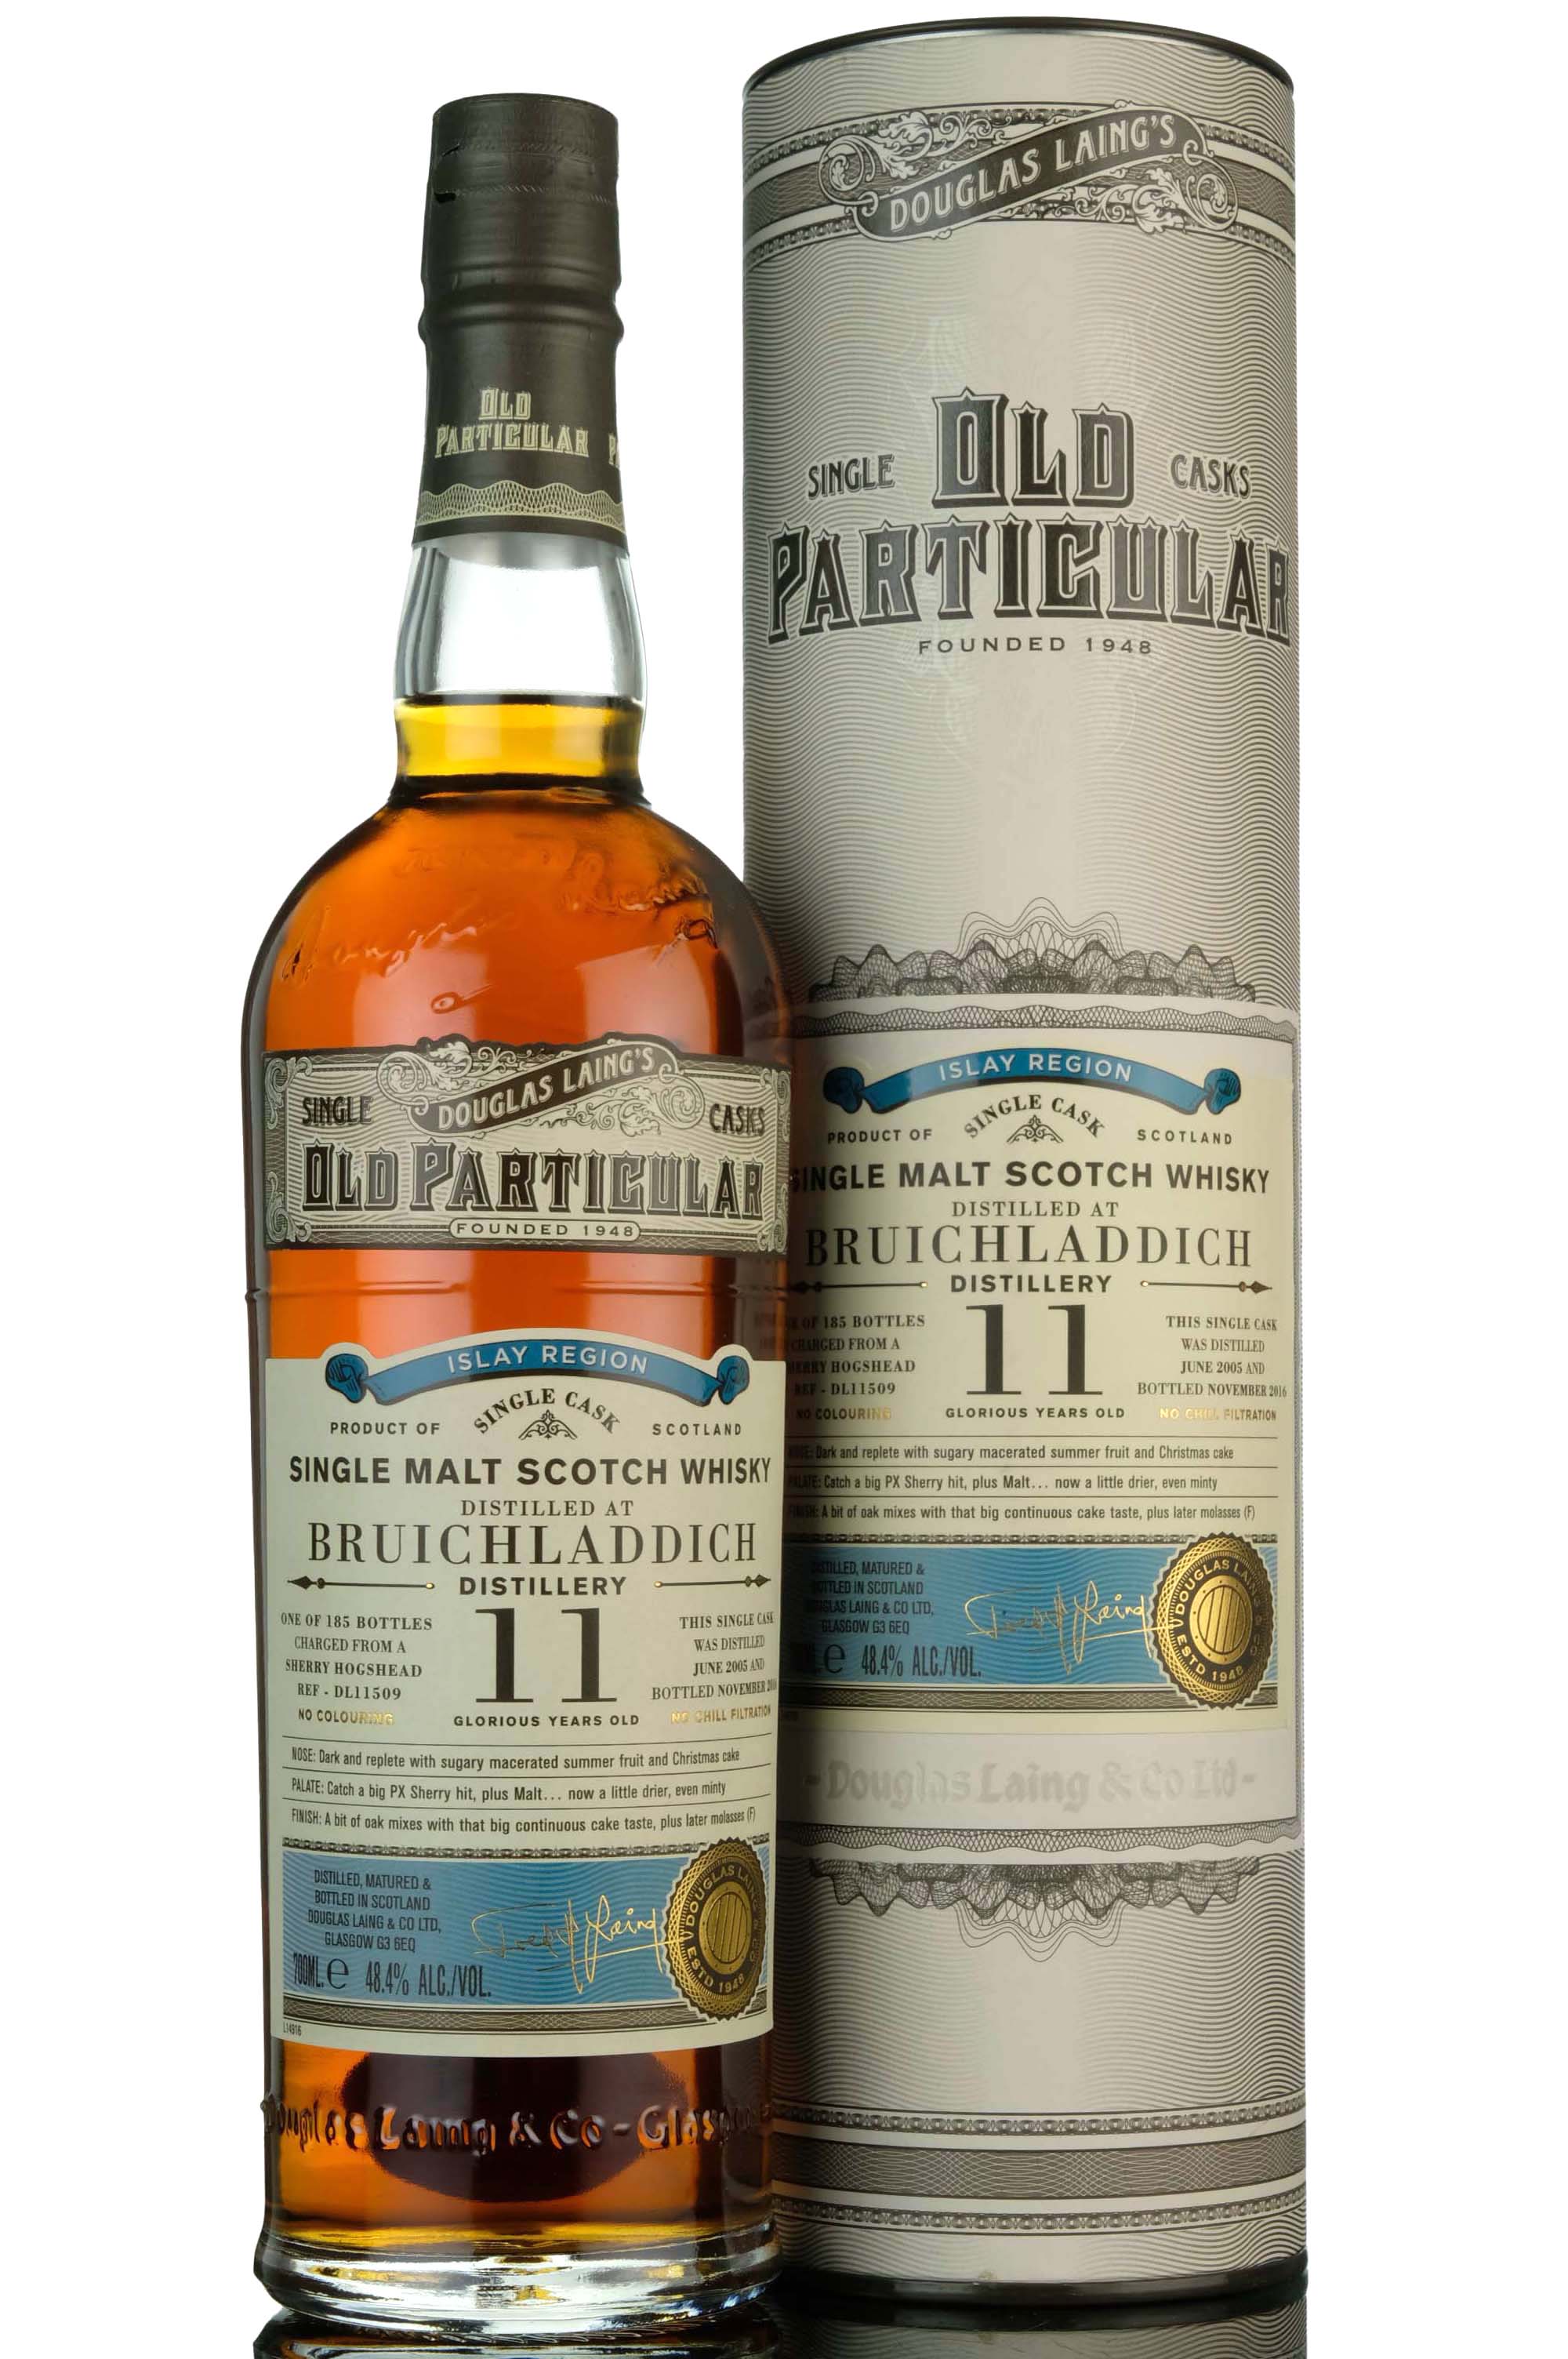 Bruichladdich 2005-2016 - 11 Year Old - Douglas Laing - Old Particular - Single Cask 11509